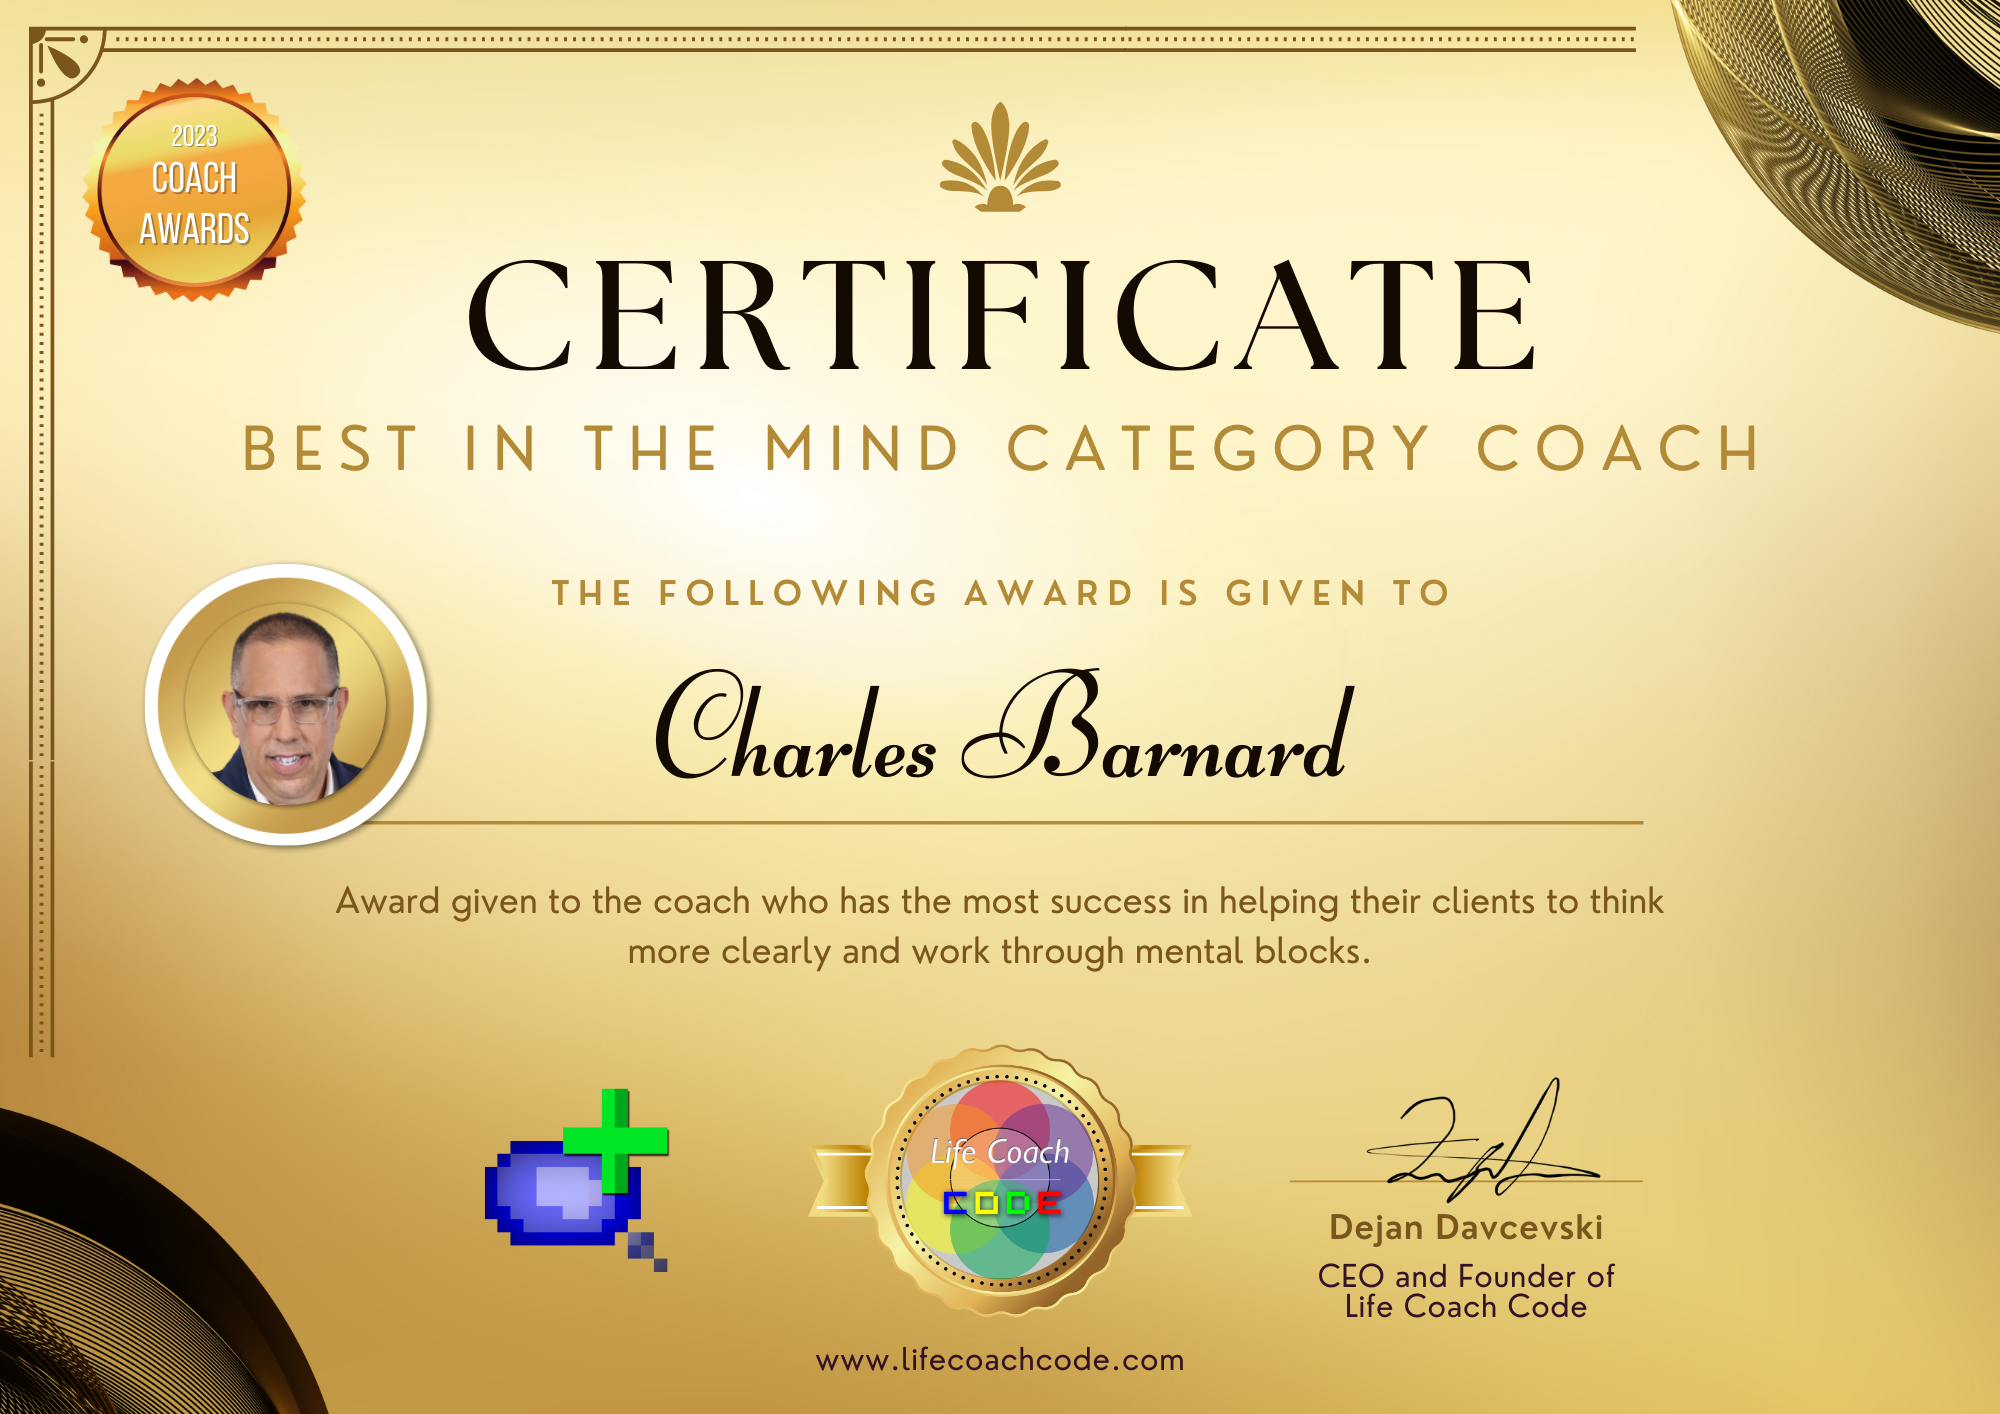 Coach Awards Best in the mind category coach